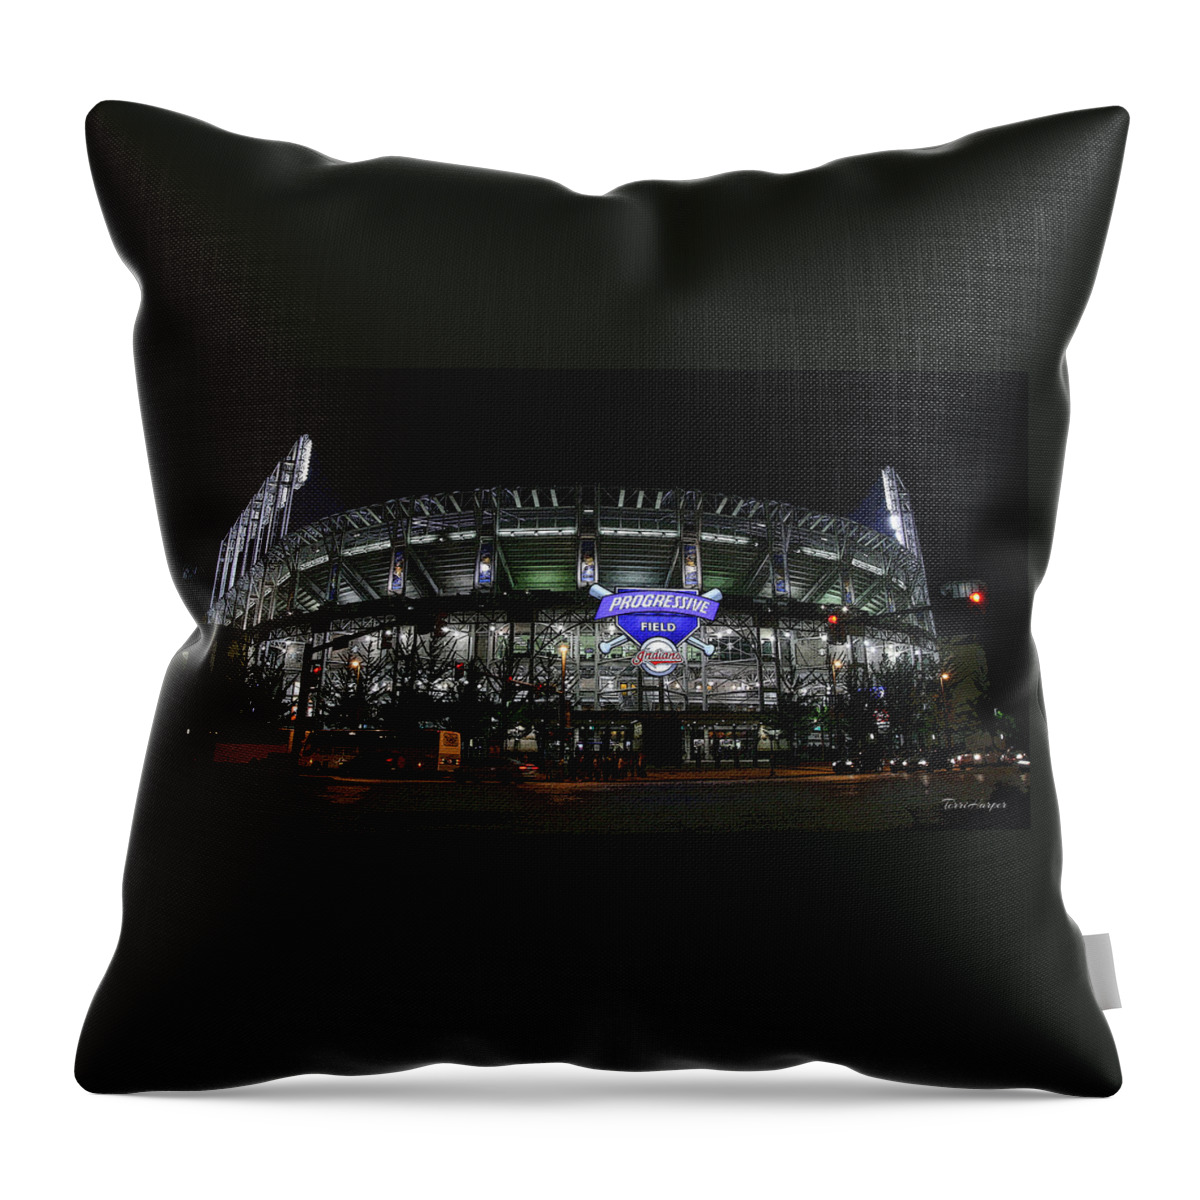 Cle Throw Pillow featuring the photograph Home Of The Cleveland Indians by Terri Harper